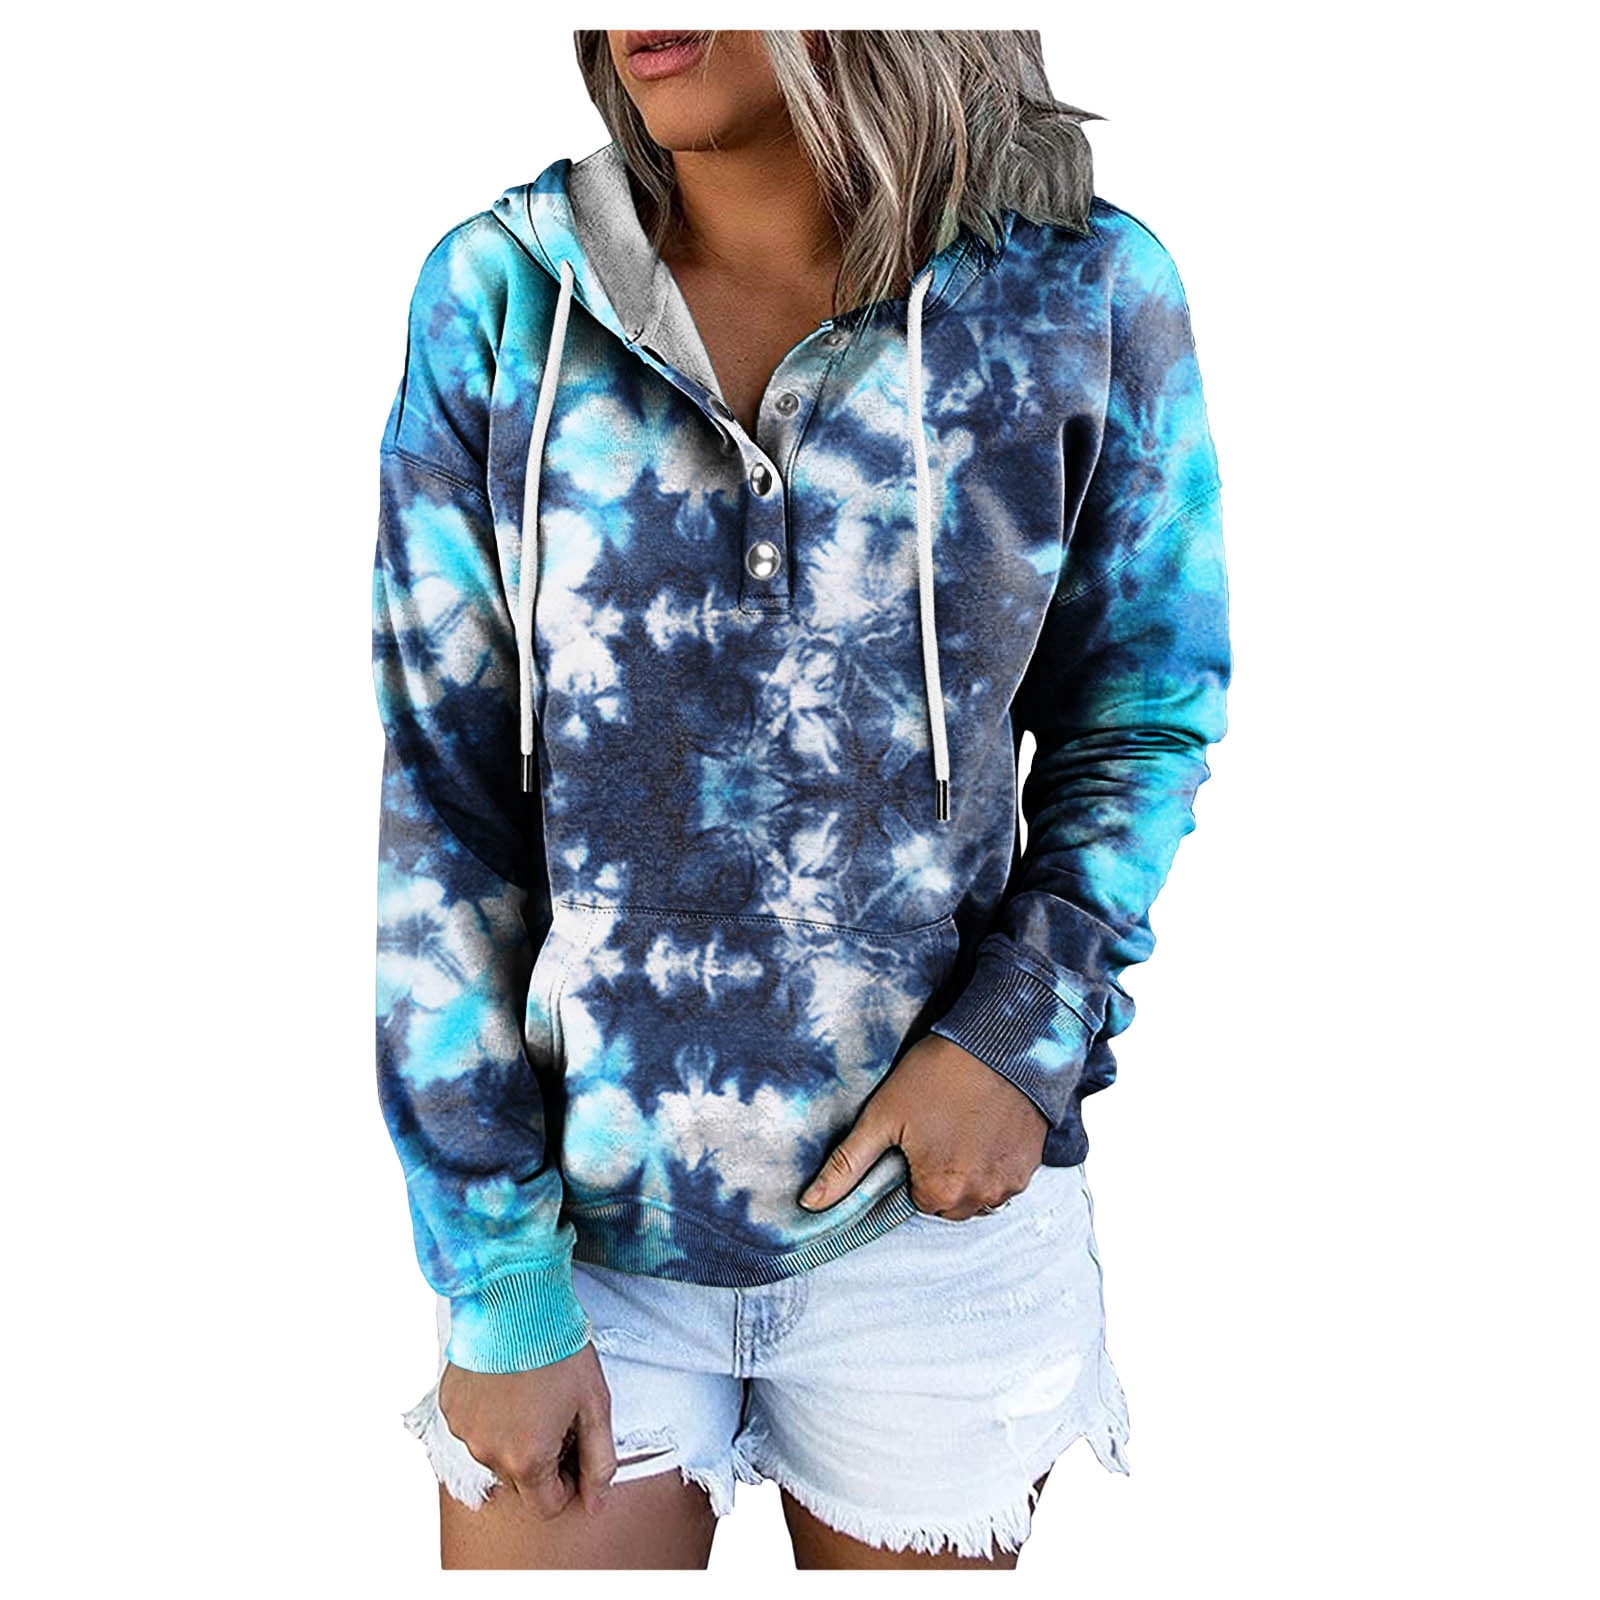 ShomPort Womens Zip up Hoodies Long Sleeve Floral Print Casual Sweatshirts  Padded Jacket with Pockets